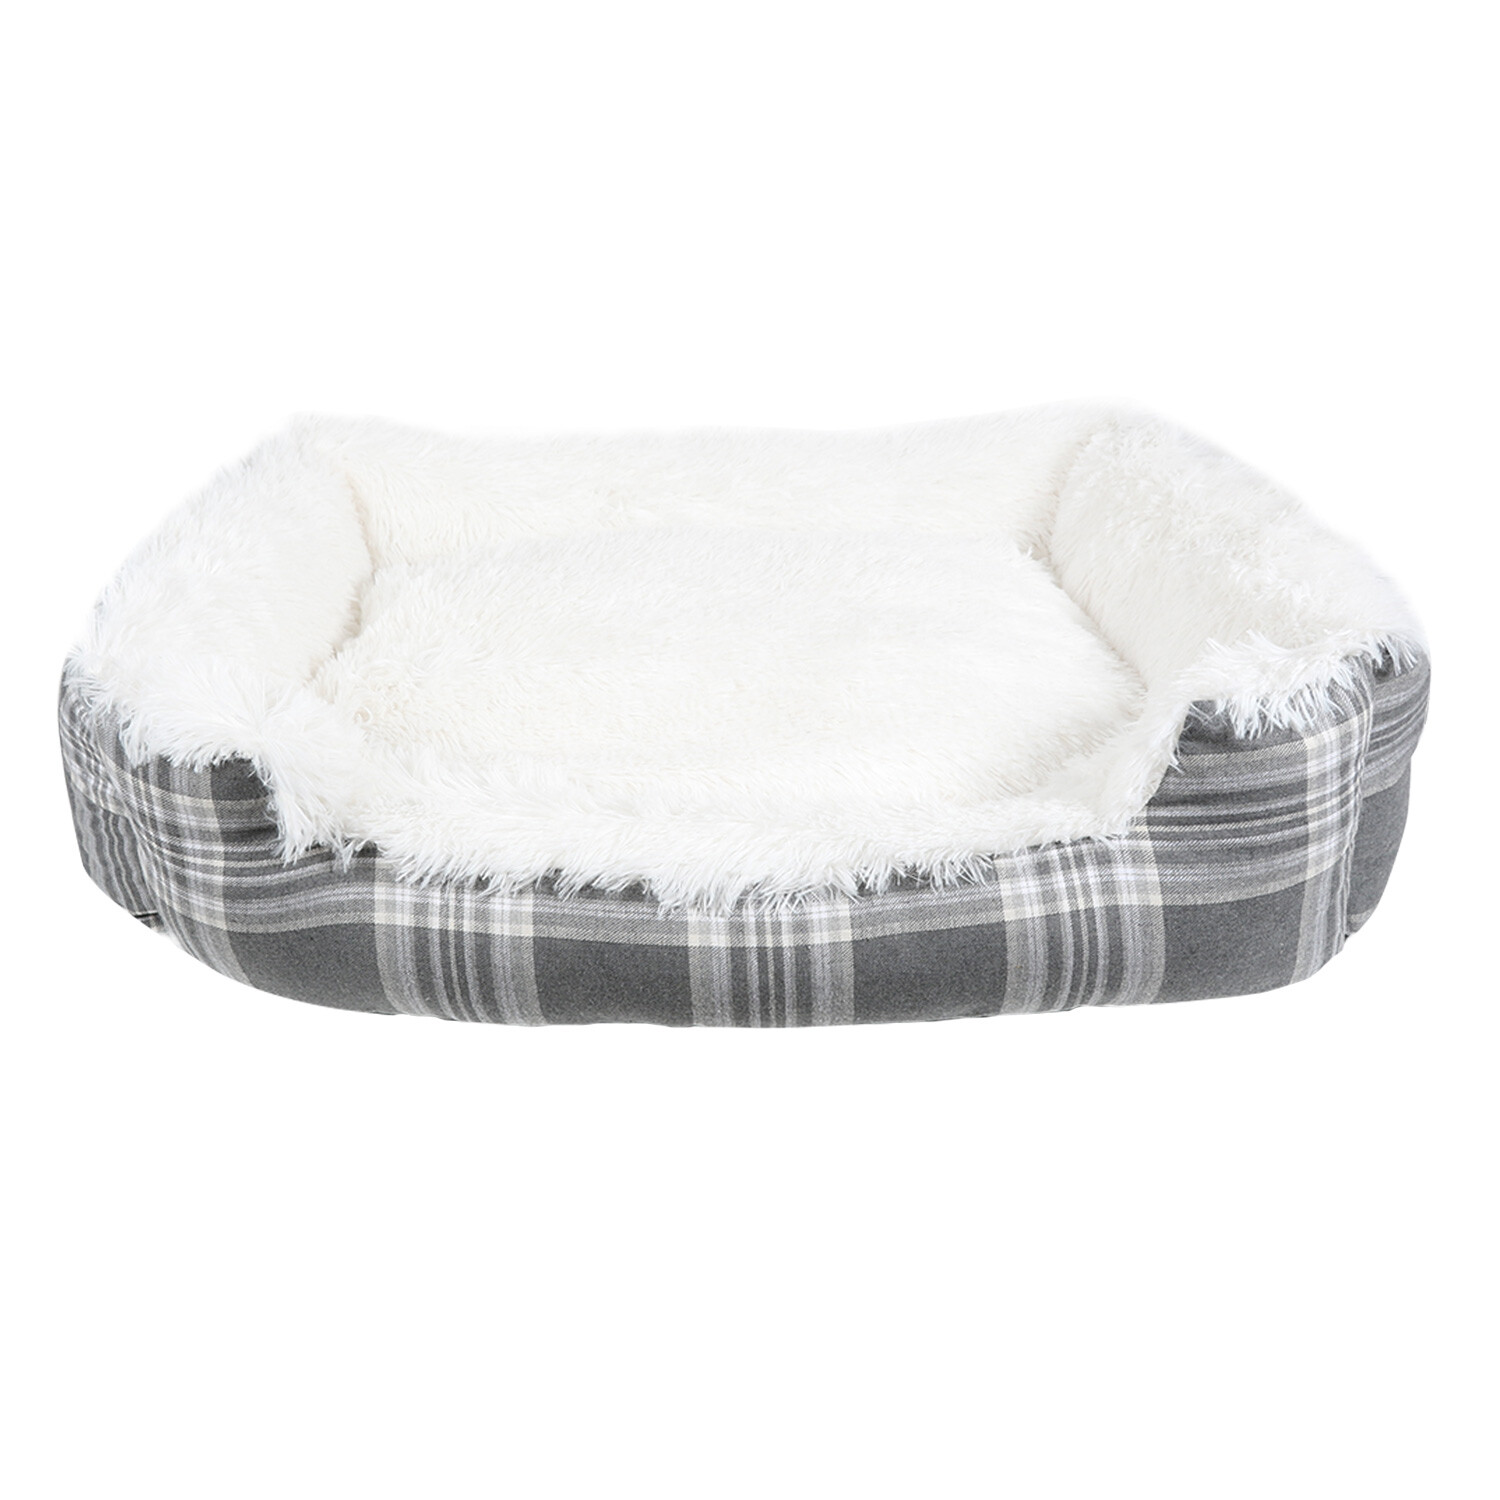 Clever Paws Small Grey Super Fluffy Check Pet Bed Image 1